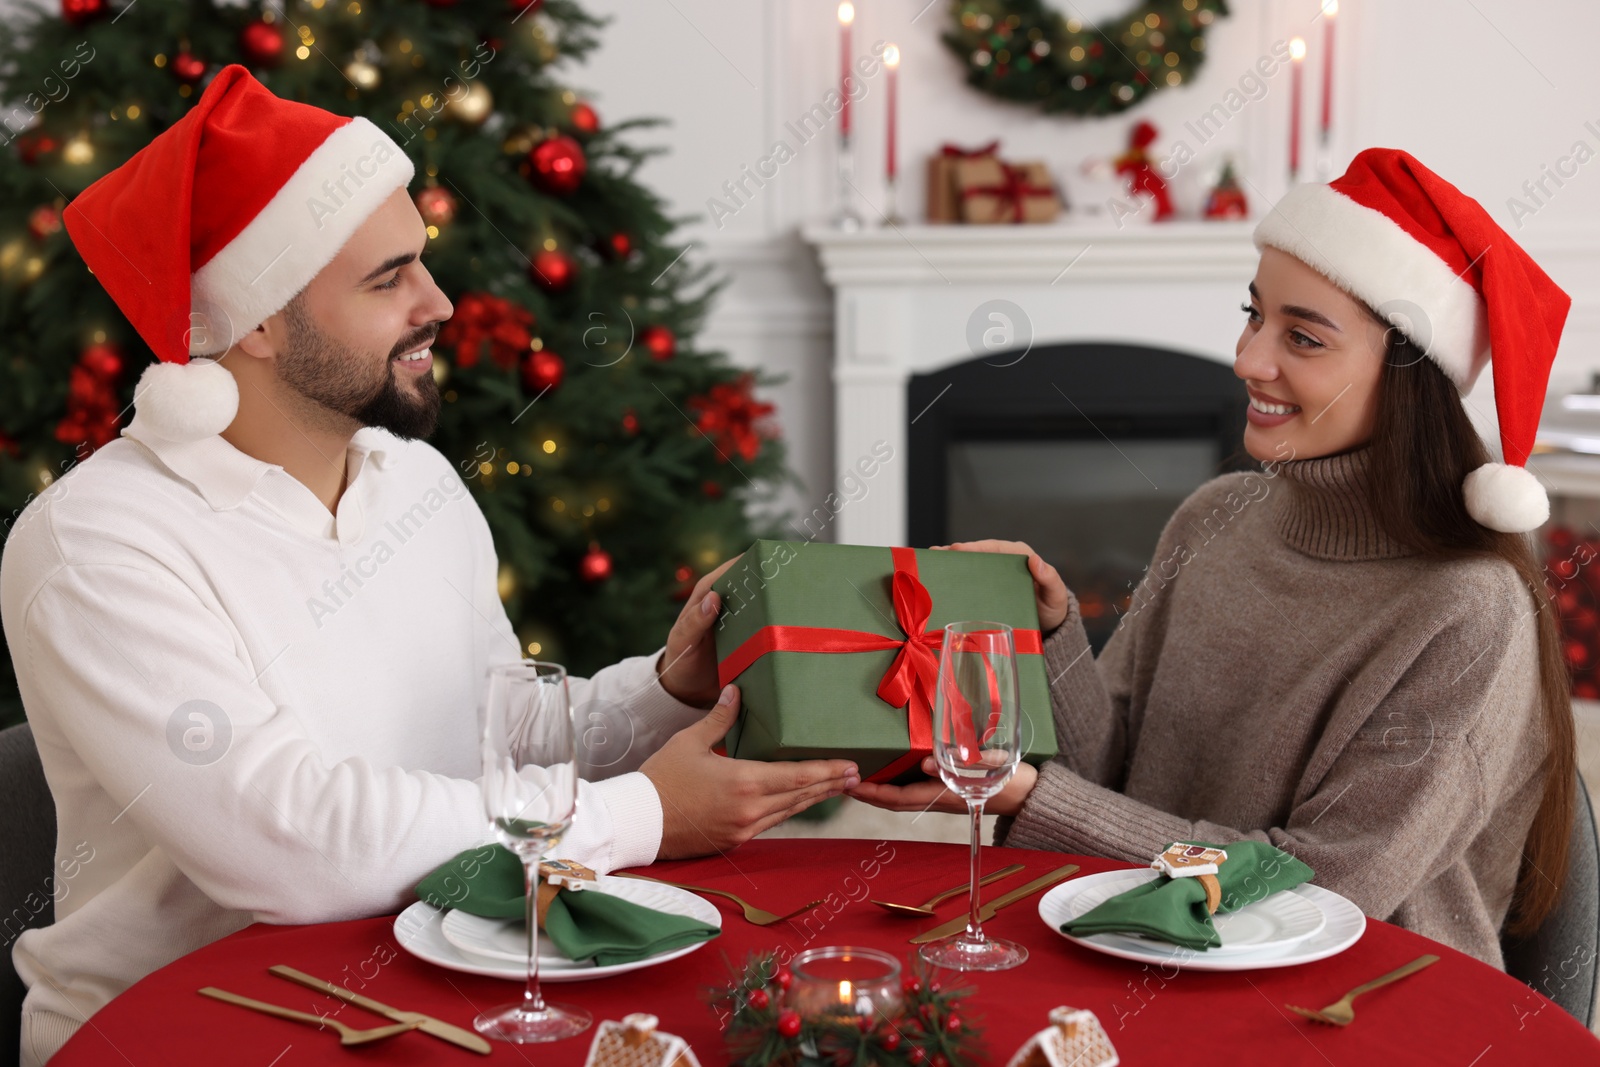 Photo of Beautiful young woman in Santa hat presenting Christmas gift to her boyfriend at served table in decorated room